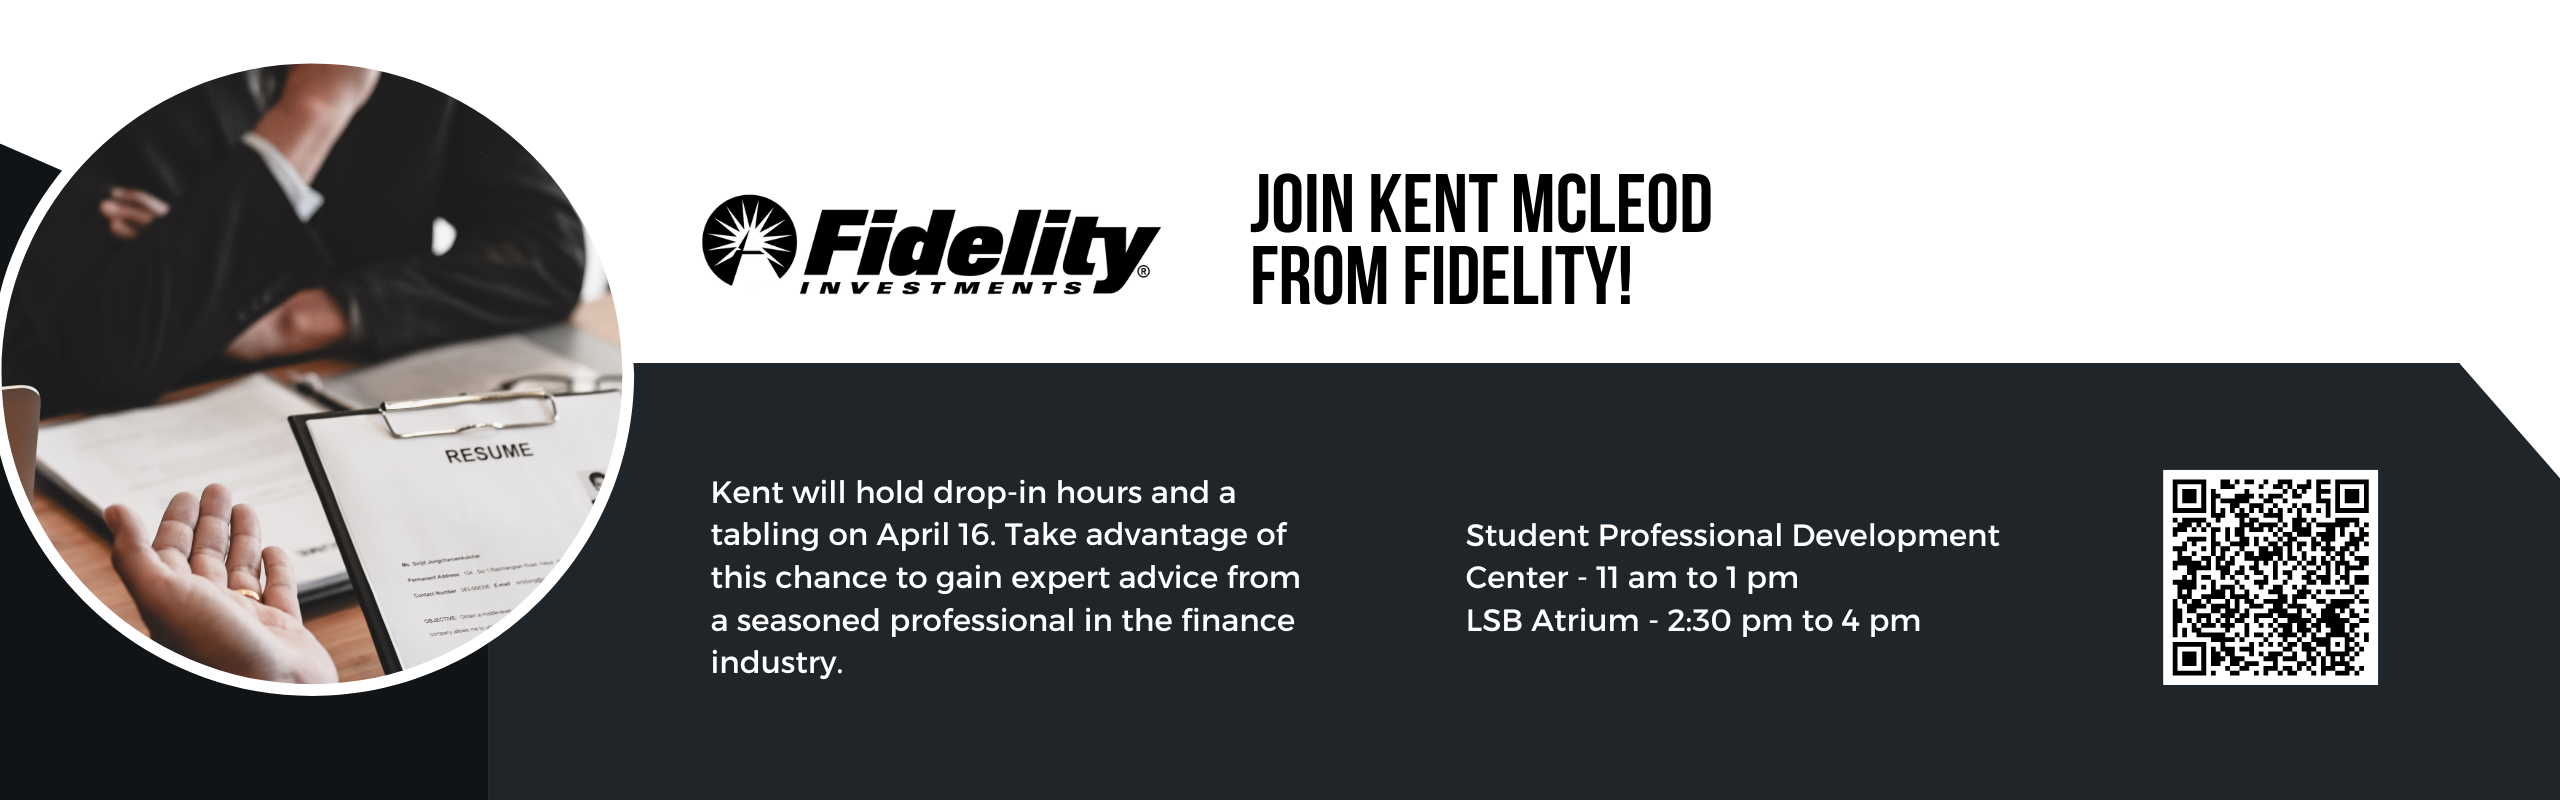 Fidelity Info Session. See EJN for more details